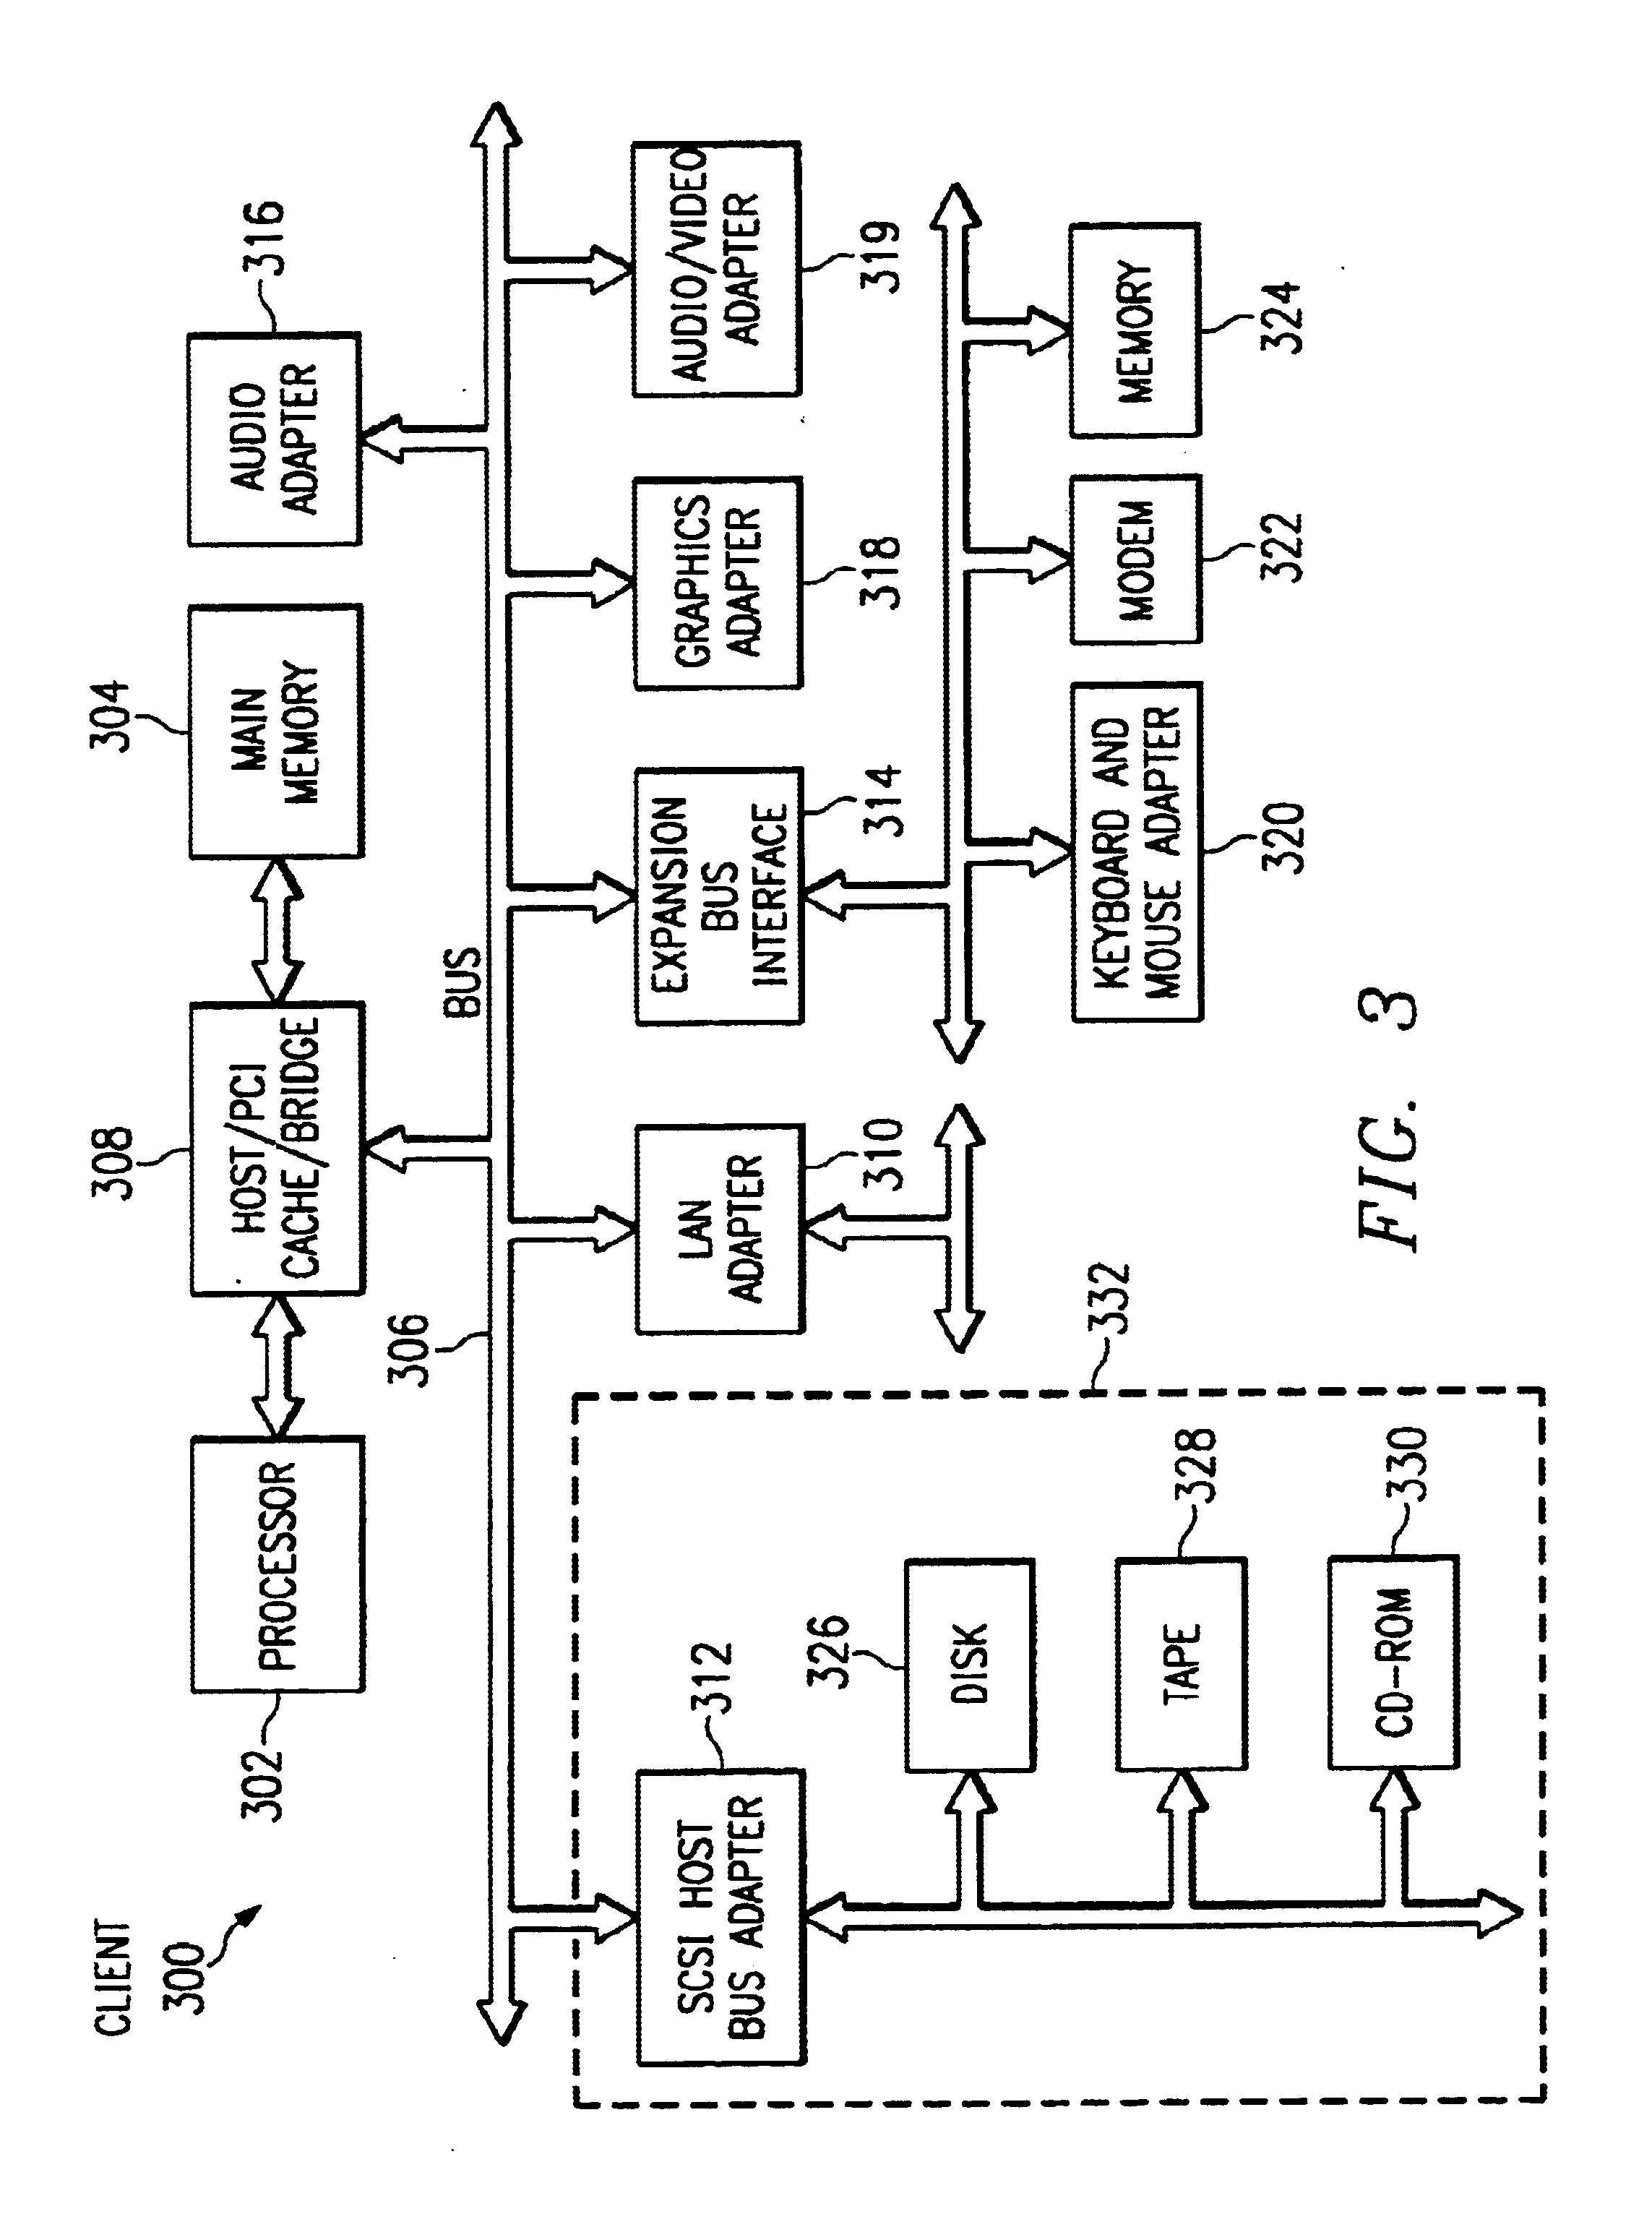 Method and apparatus for a Meta Data Service in a data processing system